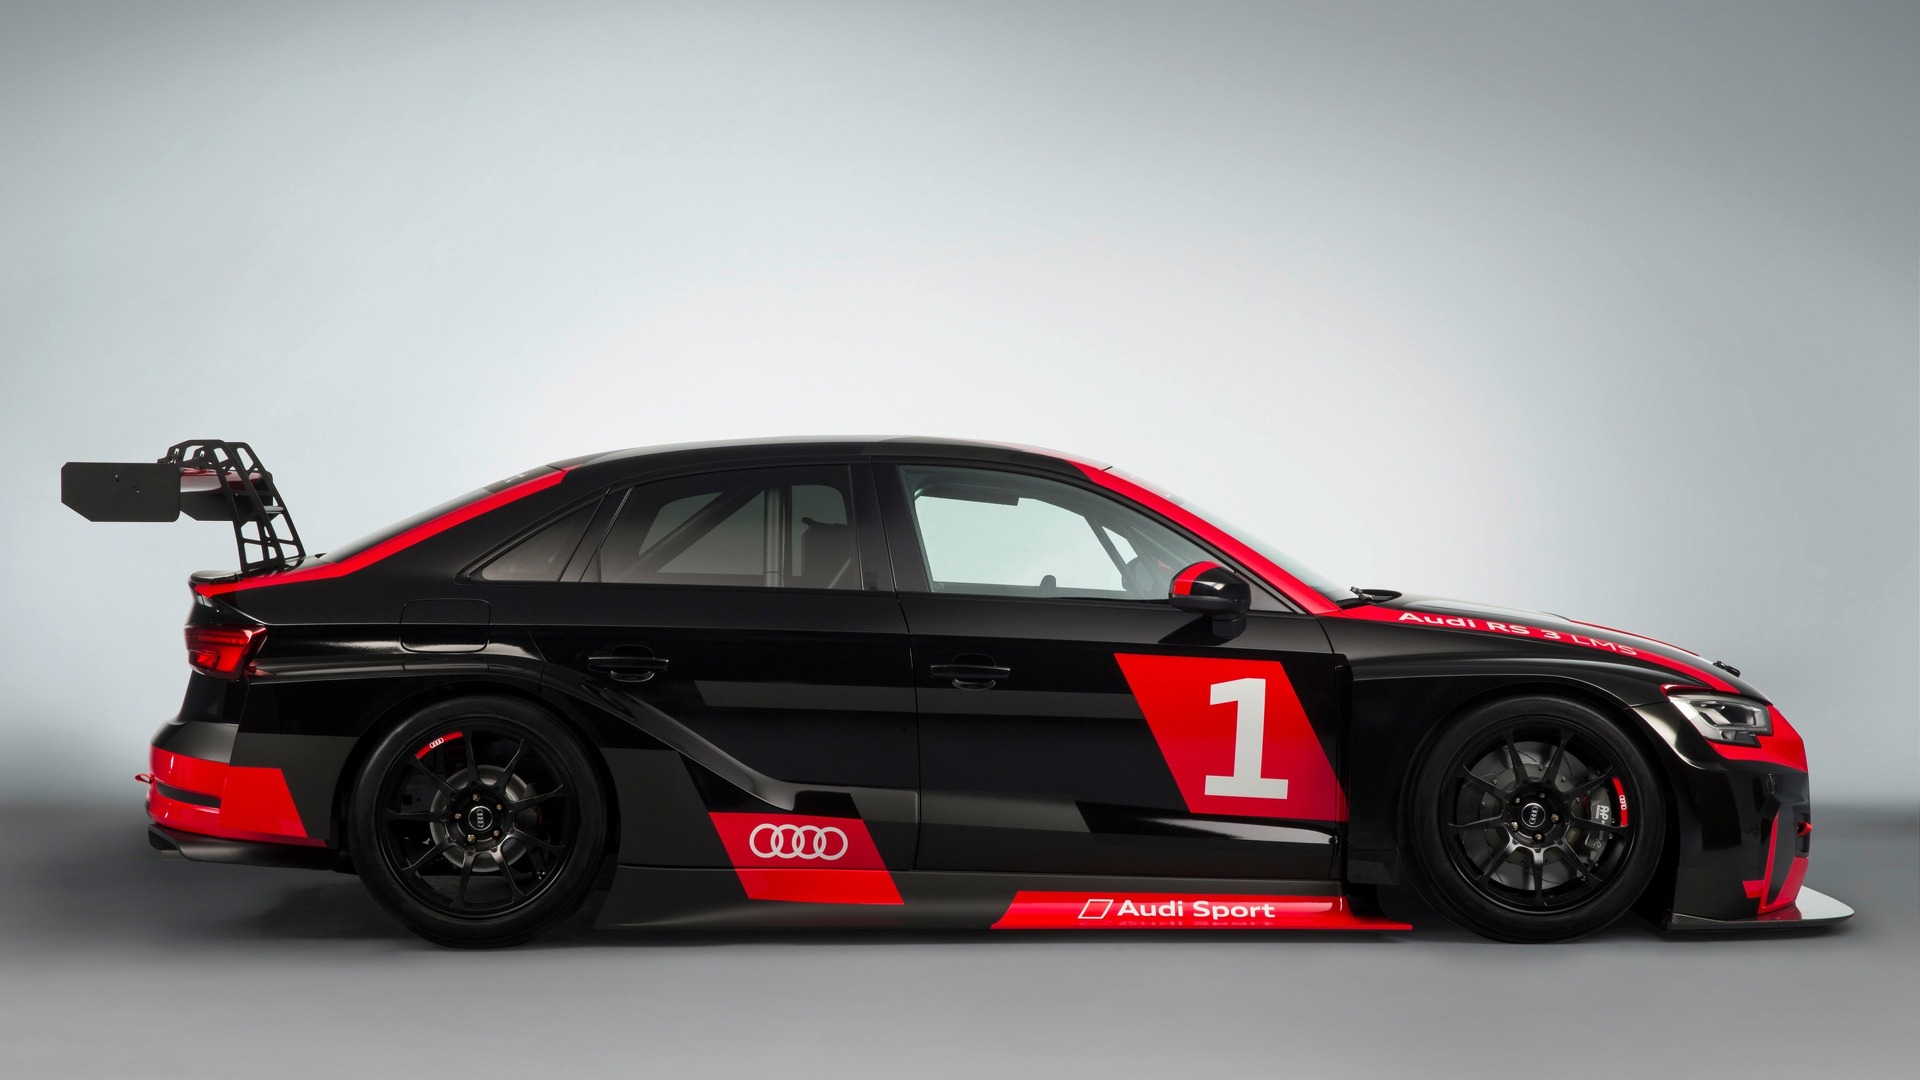 Awesome Audi RS 3 LMS racing car is ready for TCR